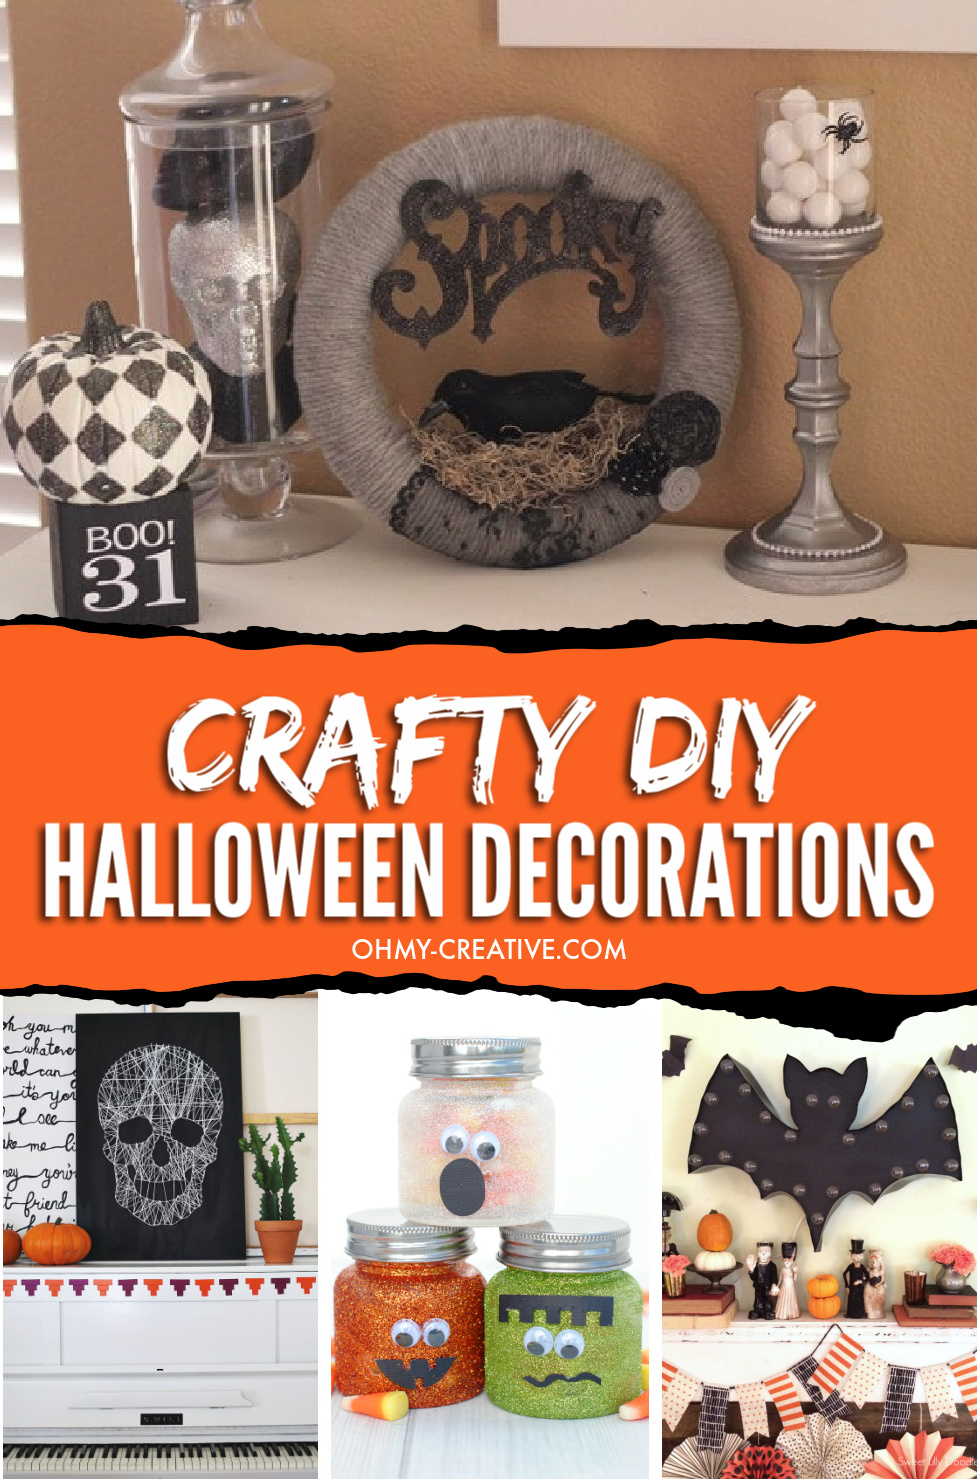 A collage of DIY Halloween Decorations for the home.